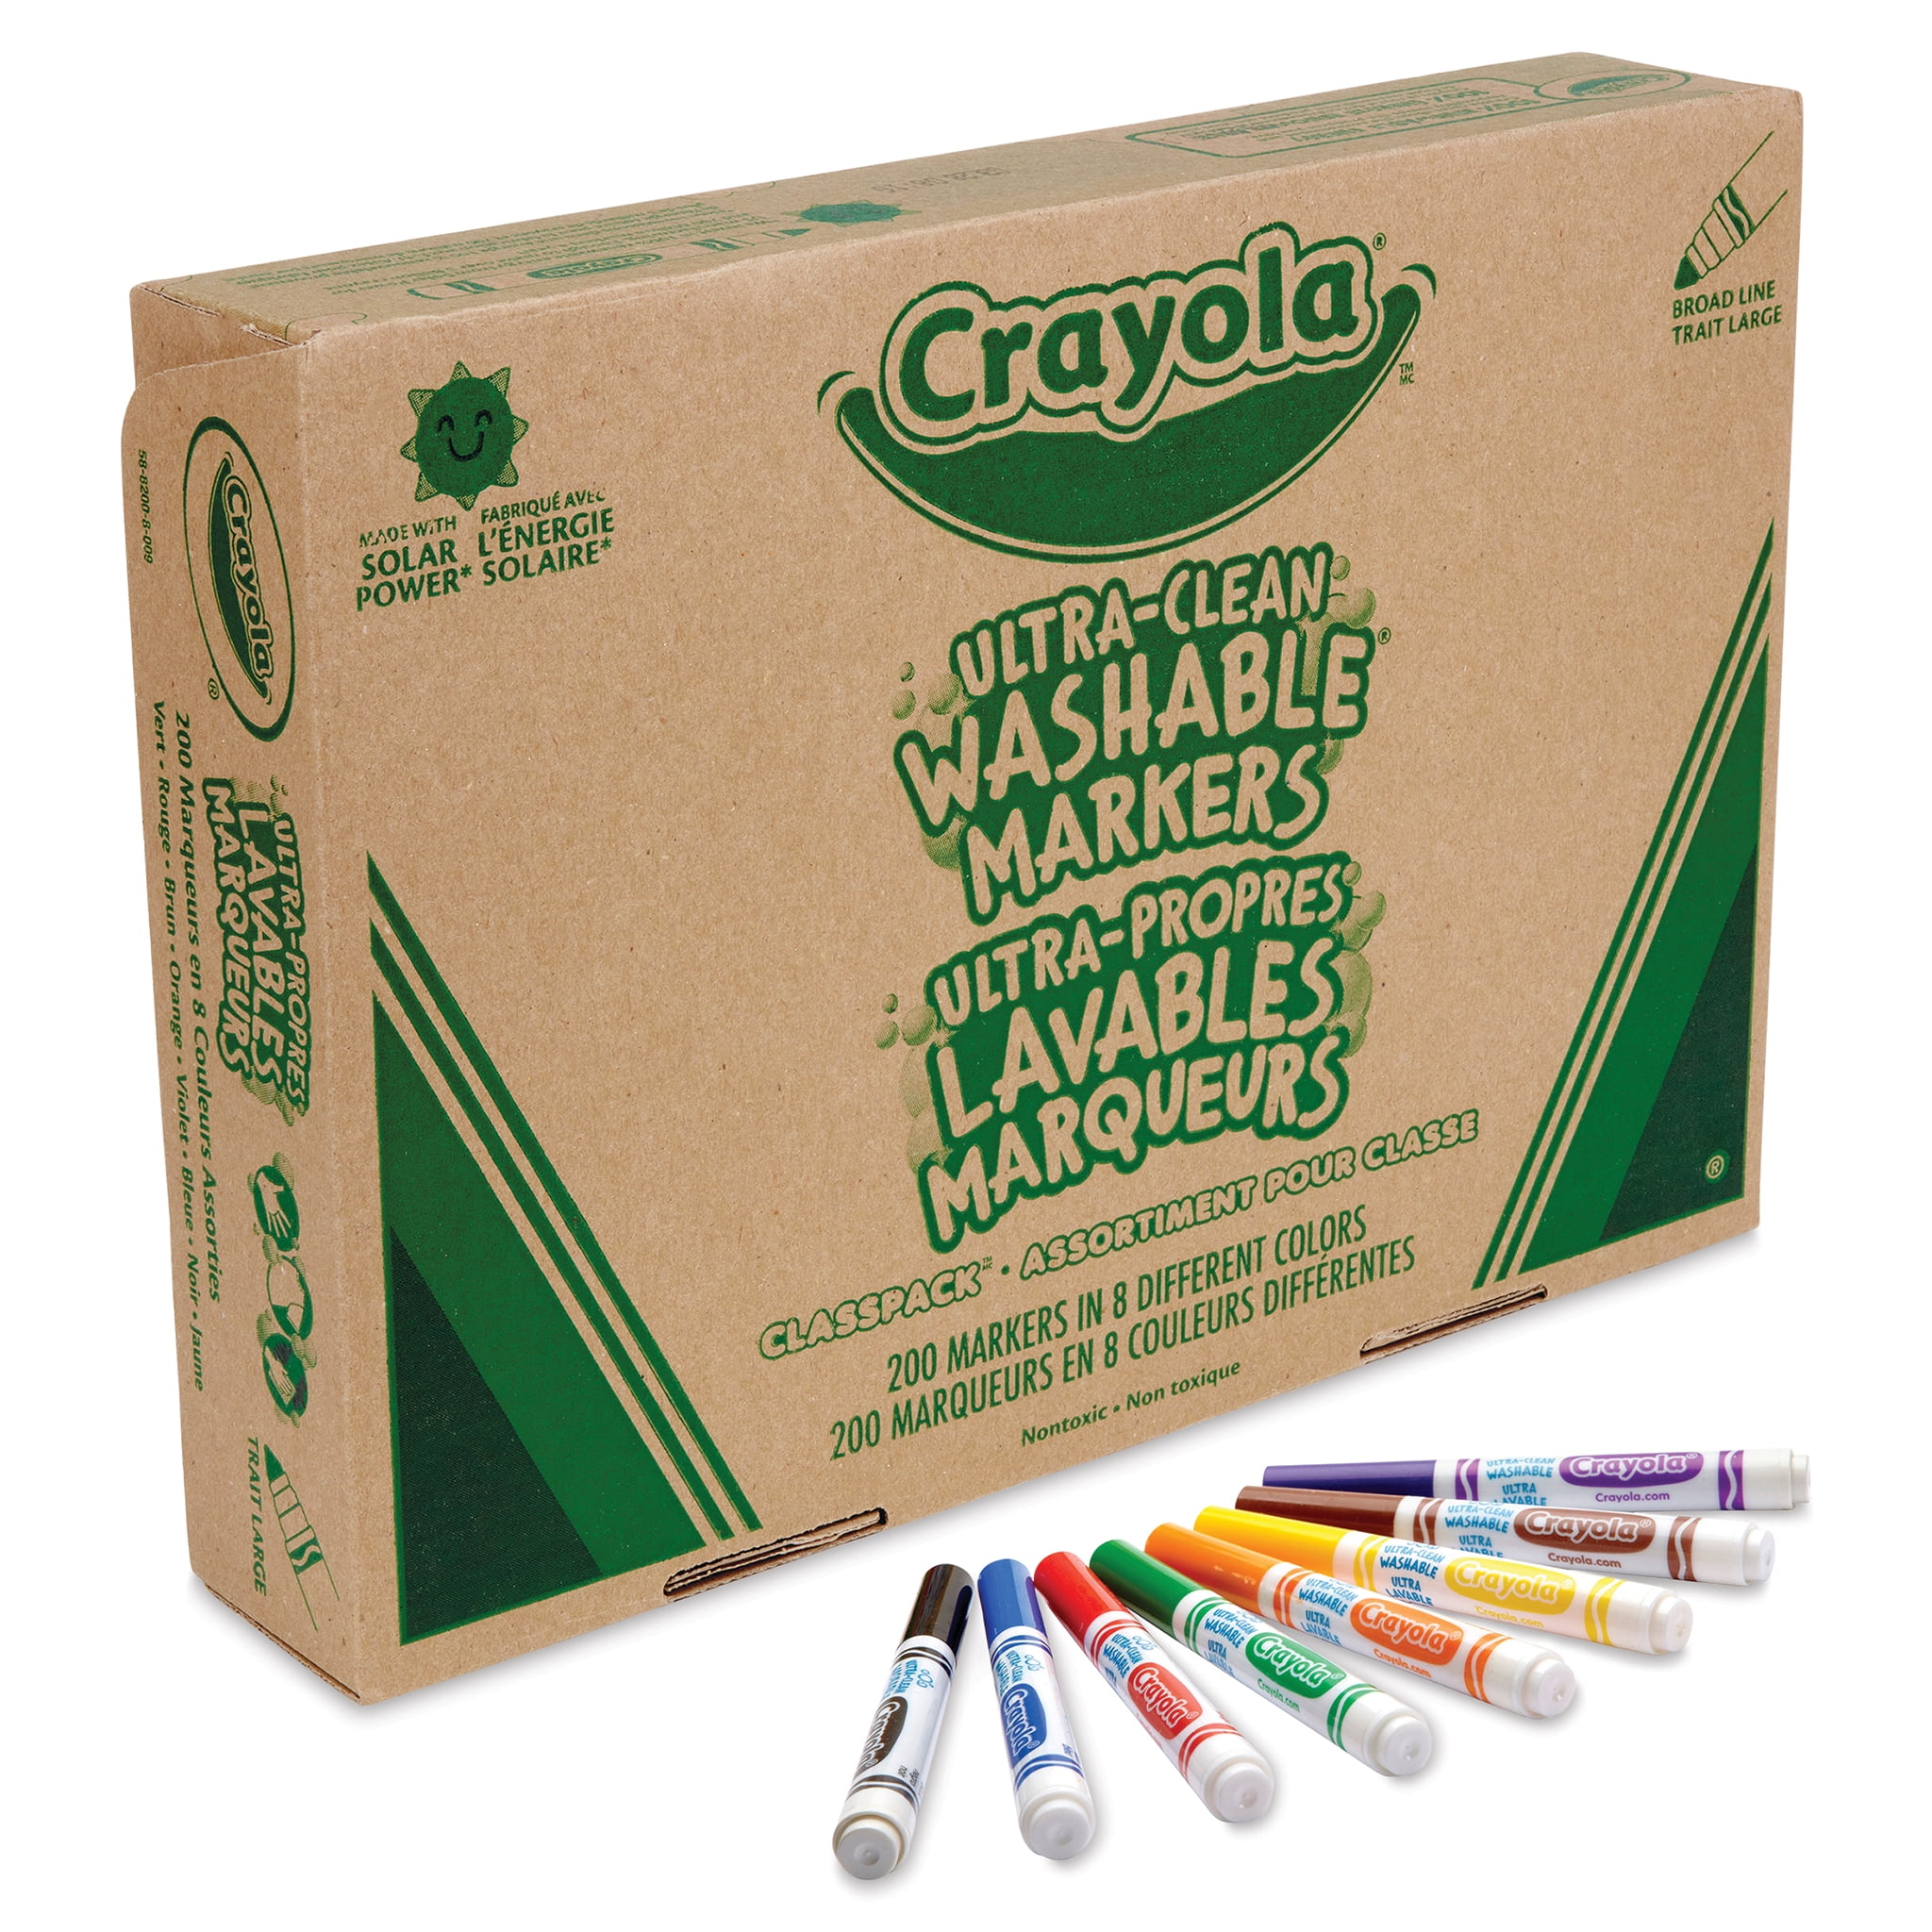 Crayola Washable Broad Line Markers & Large Crayons Combo Classpack, 2